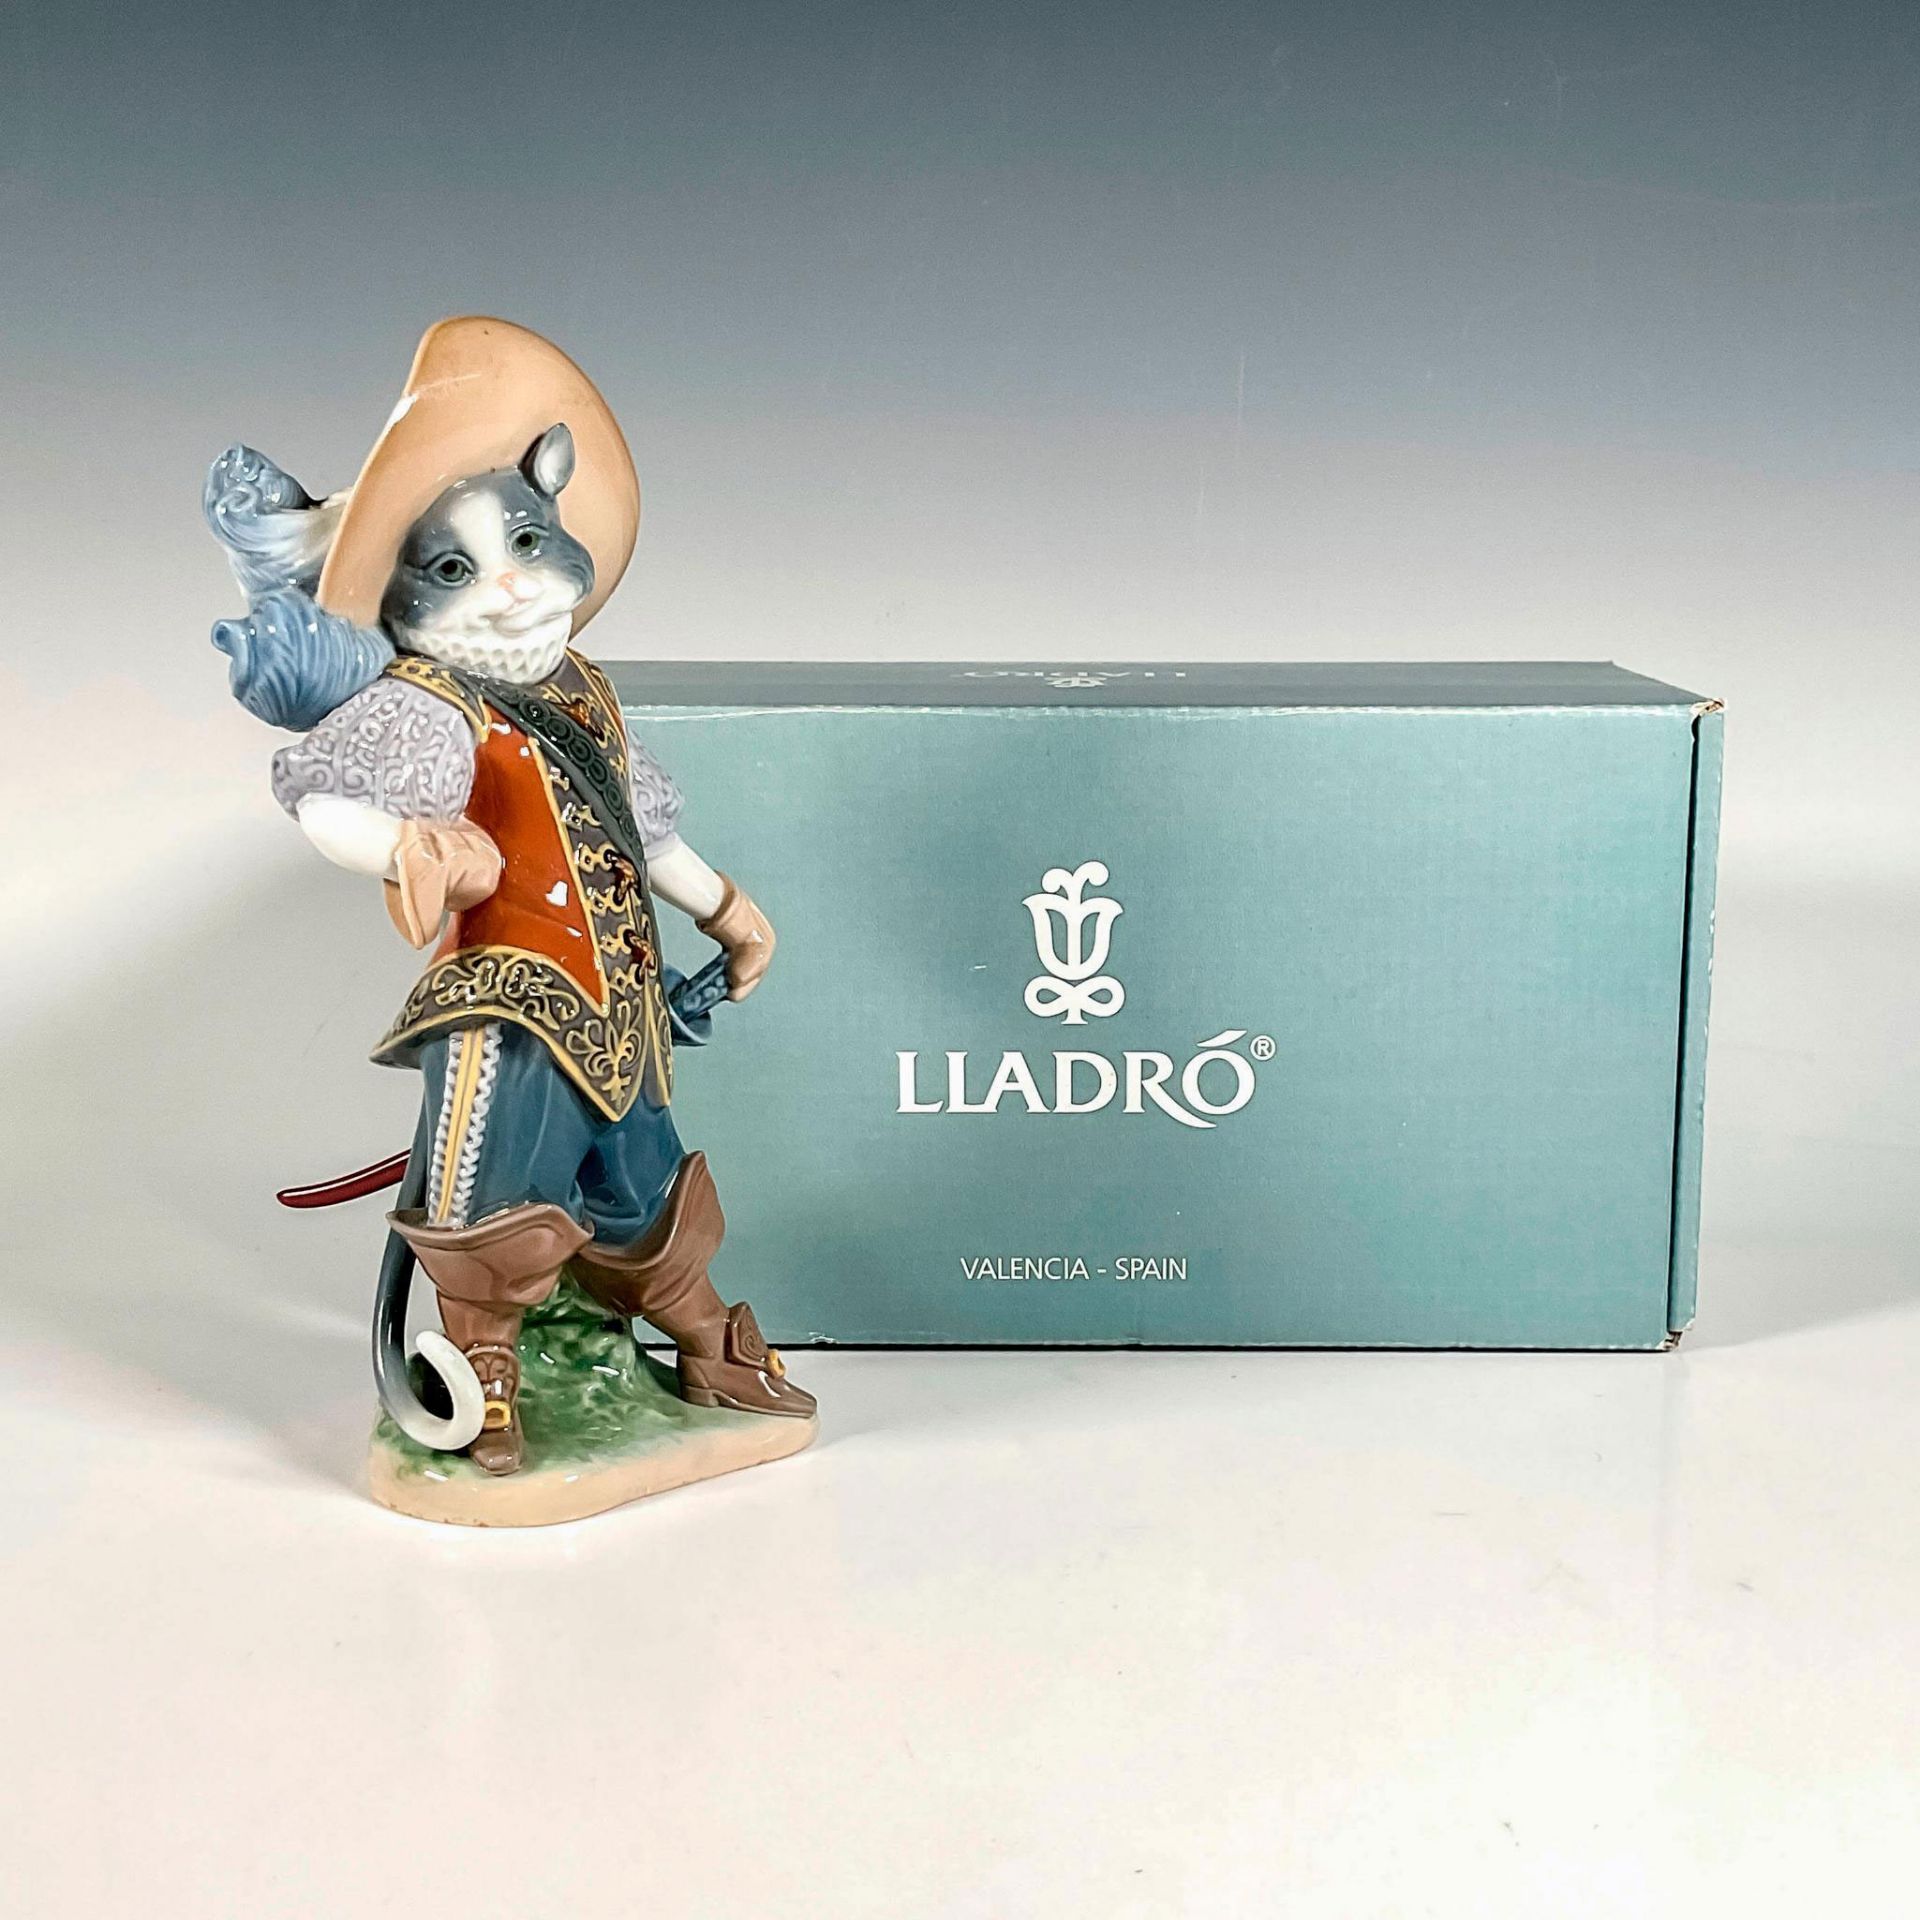 Puss In Boots 1008599 - Lladro Porcelain Figurine - Image 4 of 4